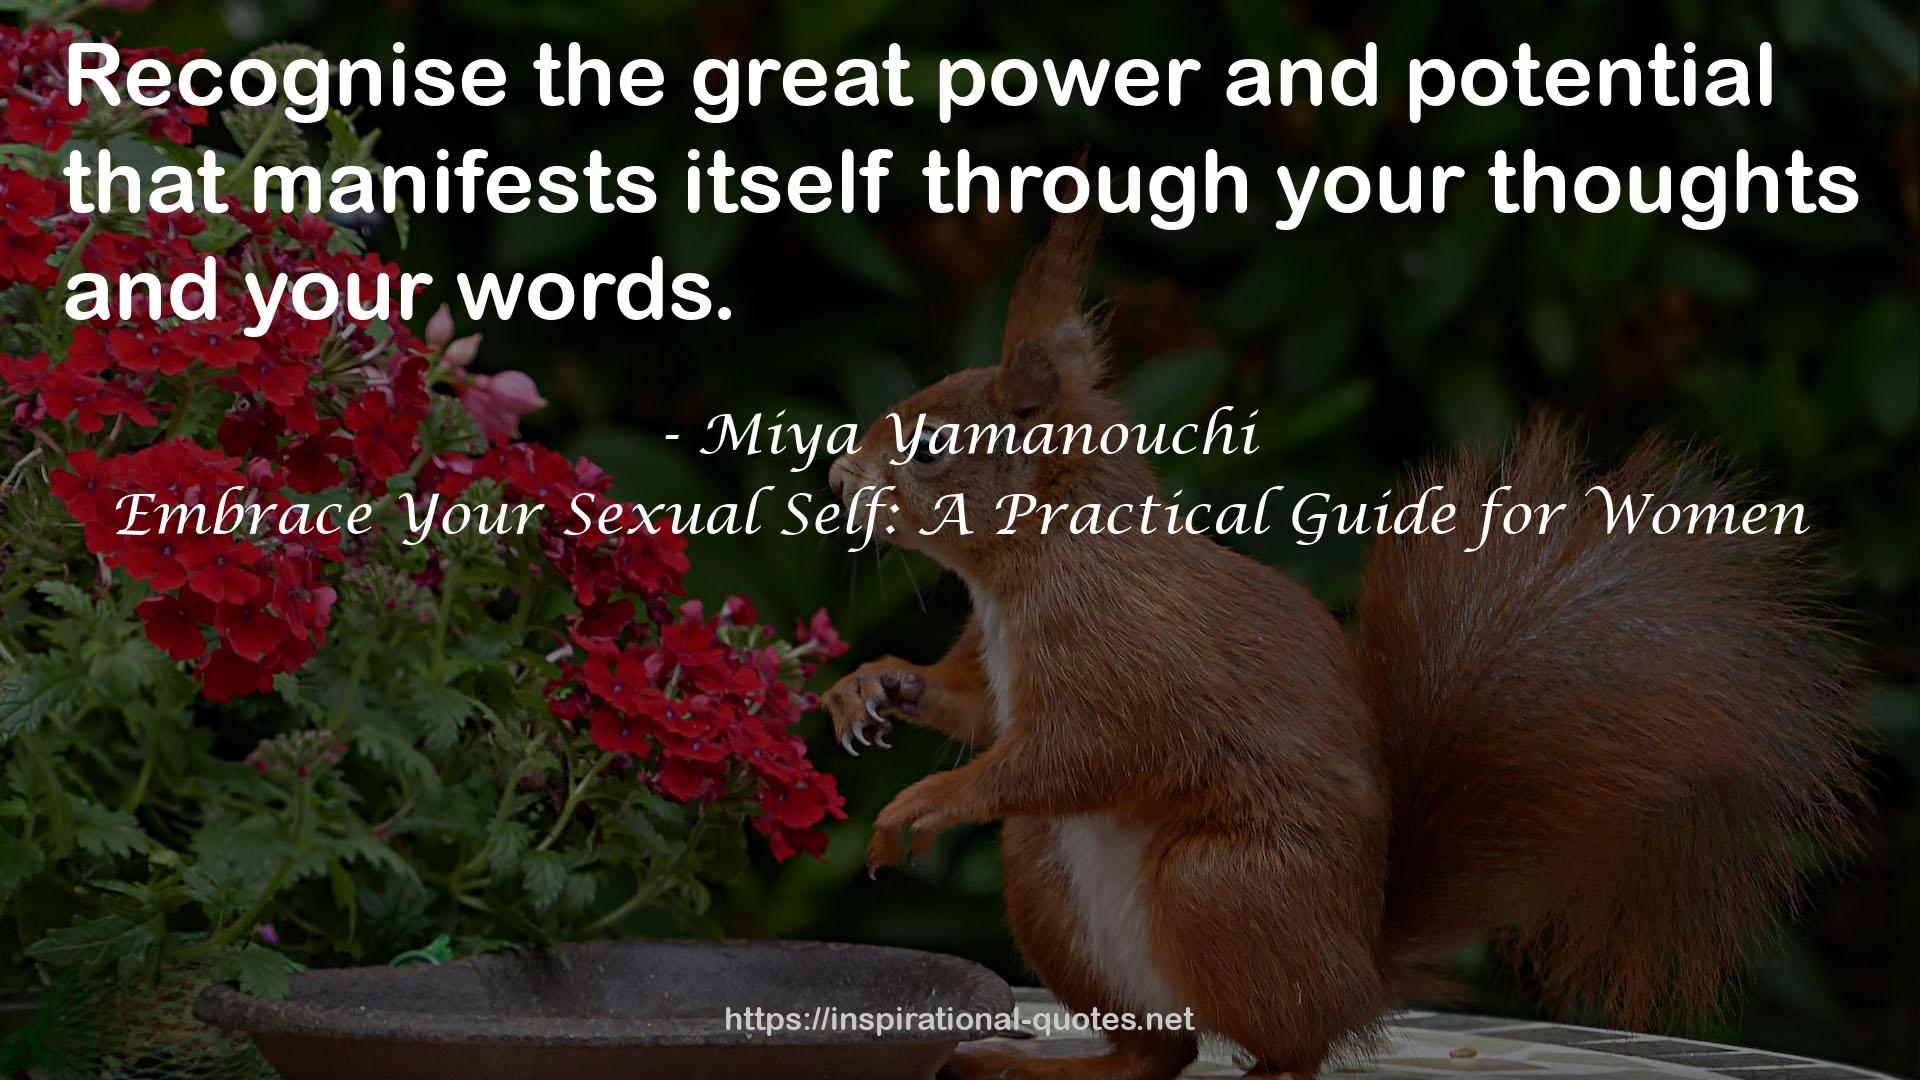 Embrace Your Sexual Self: A Practical Guide for Women QUOTES